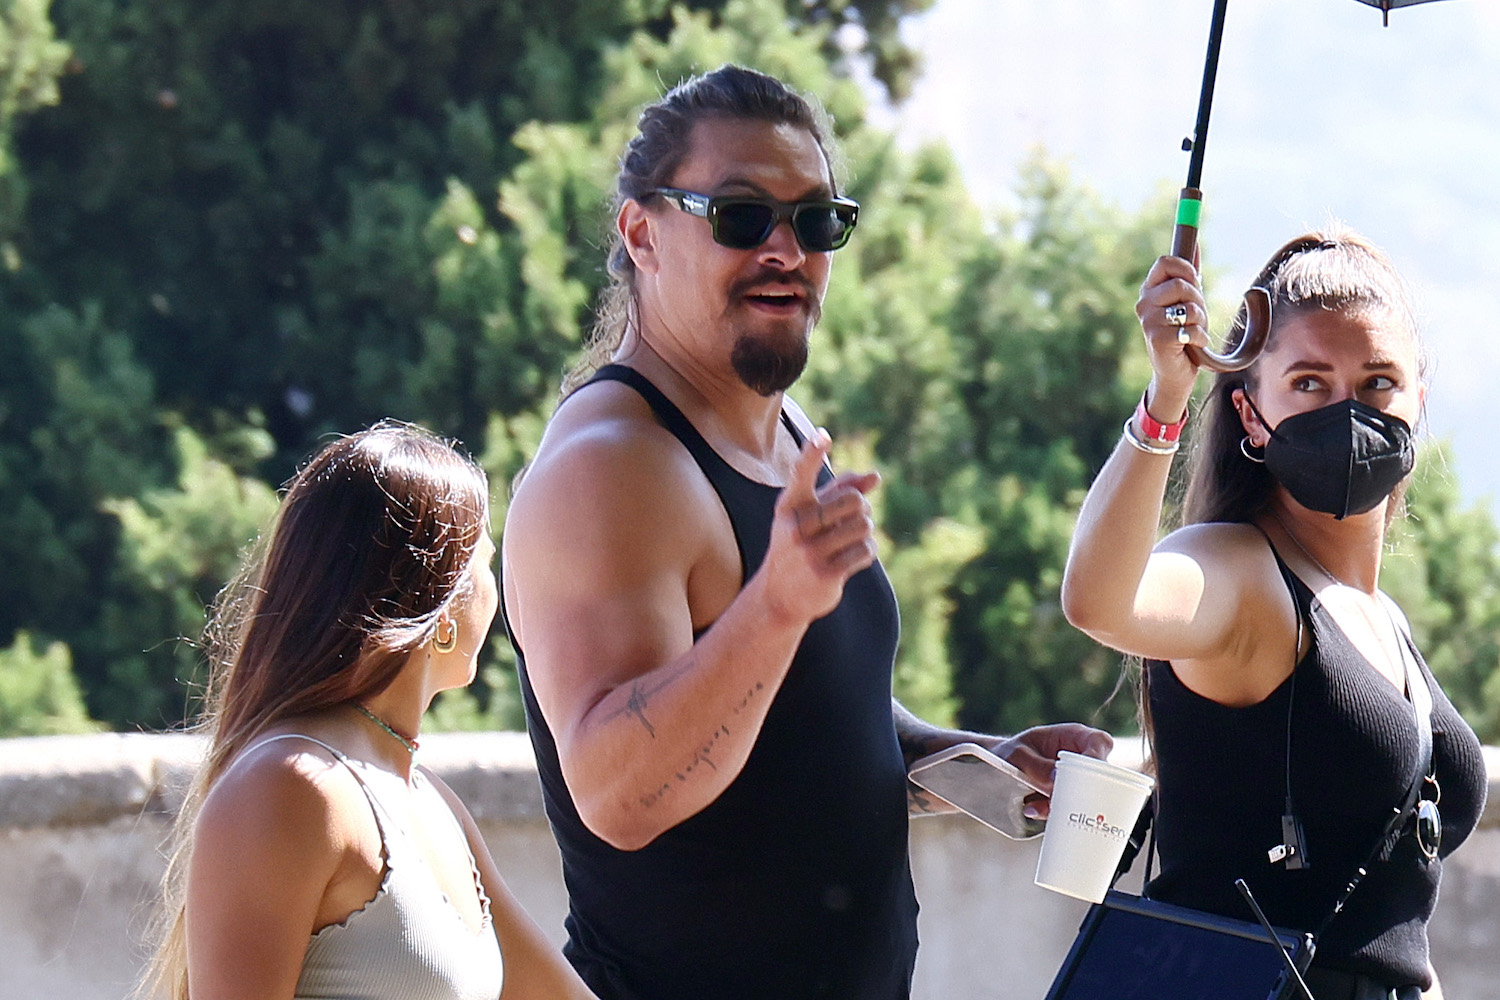 Jason Momoa smiles for the camera on the set of Fast and Furious 10 (Fast X) in Turin Italy.